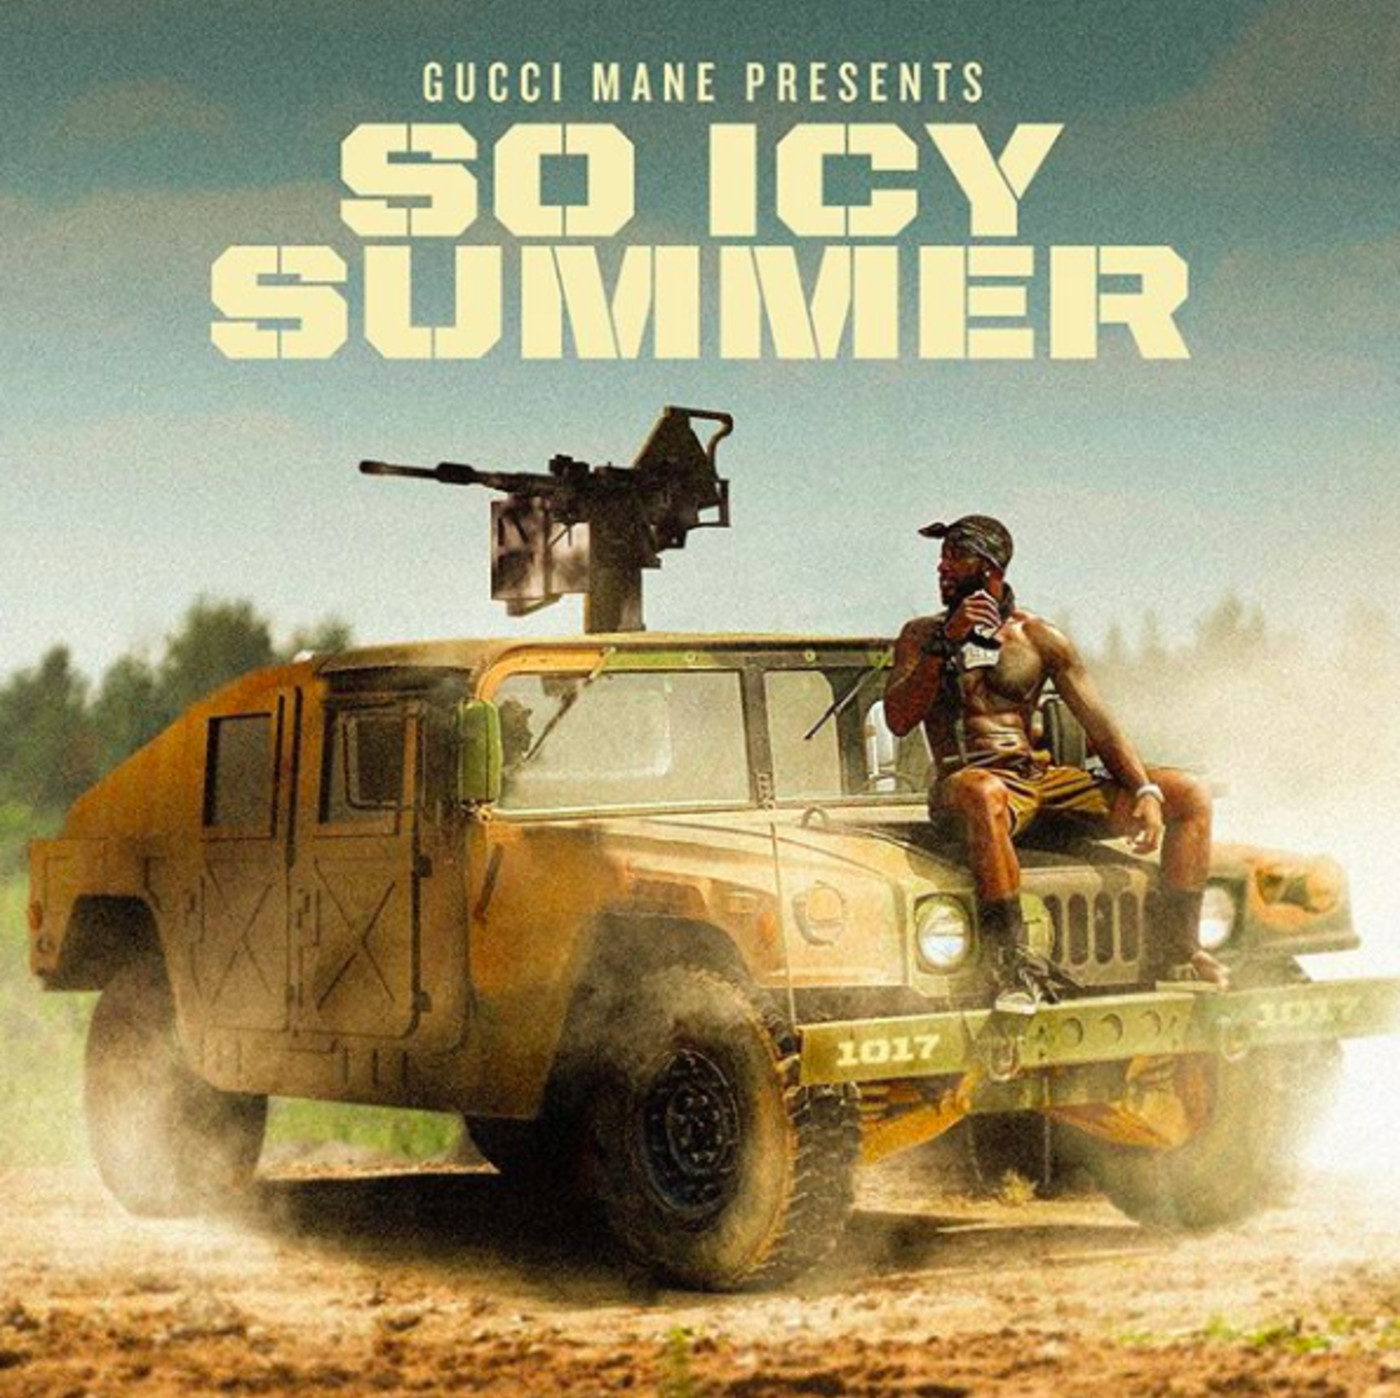 Sightseeing smugling Bedrift Gucci Mane Drops New Album, 'Gucci Mane Presents: So Icy Summer' | Complex